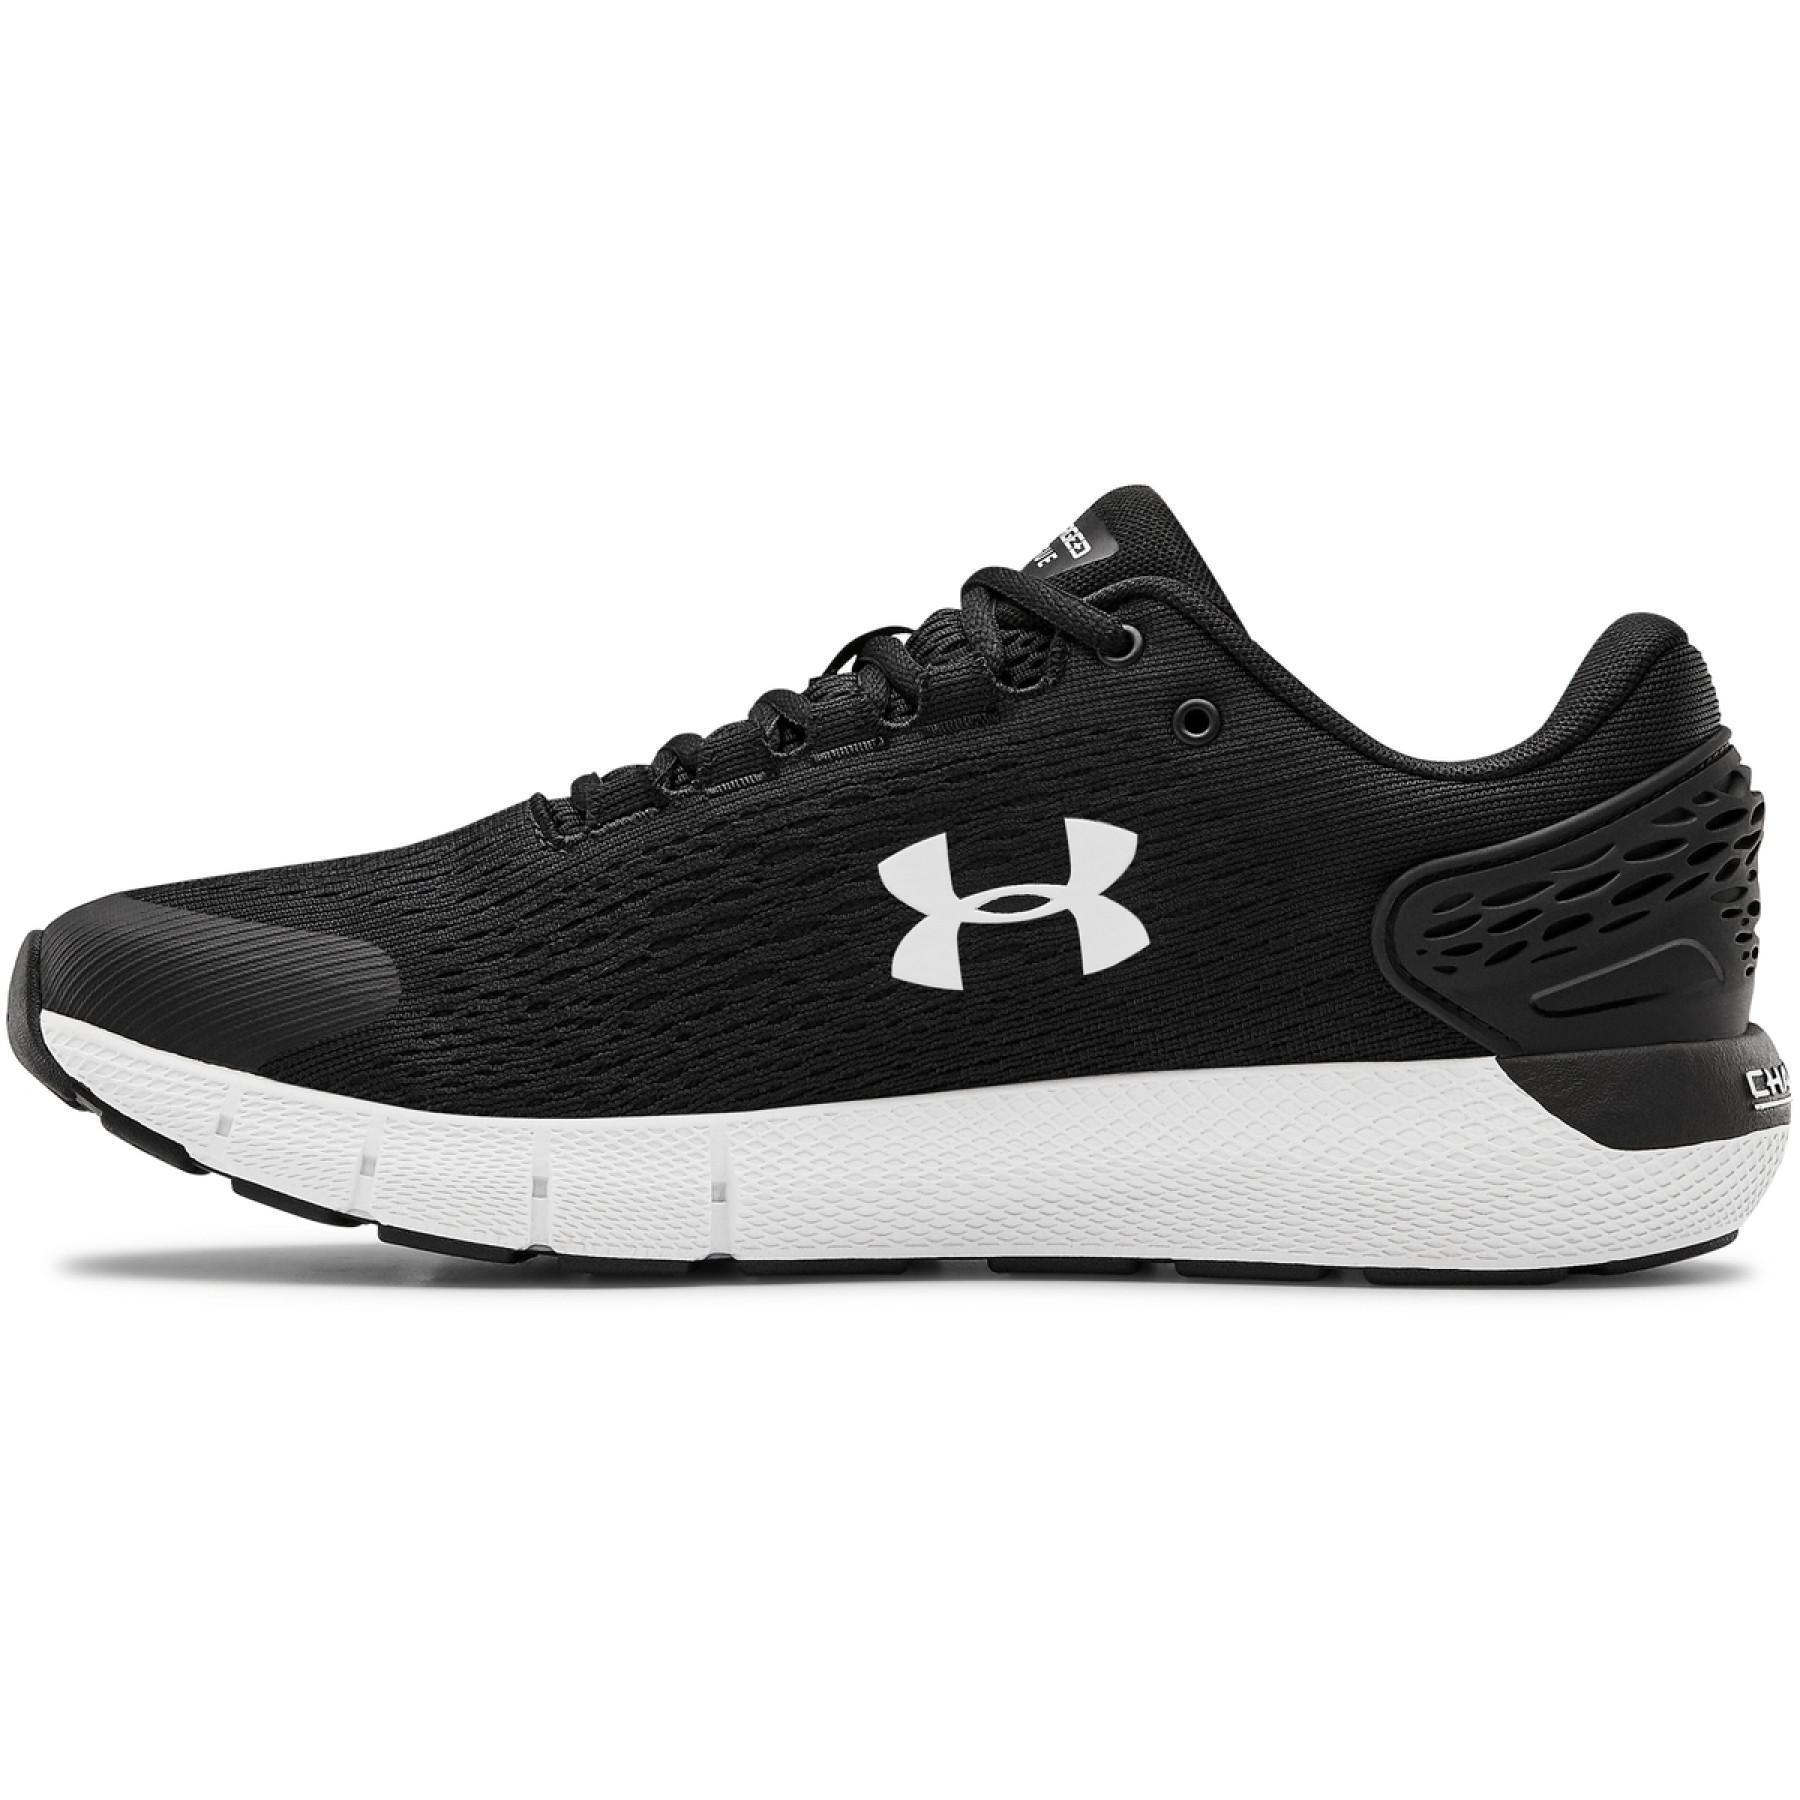 Laufschuhe Under Armour Charged Rogue 2